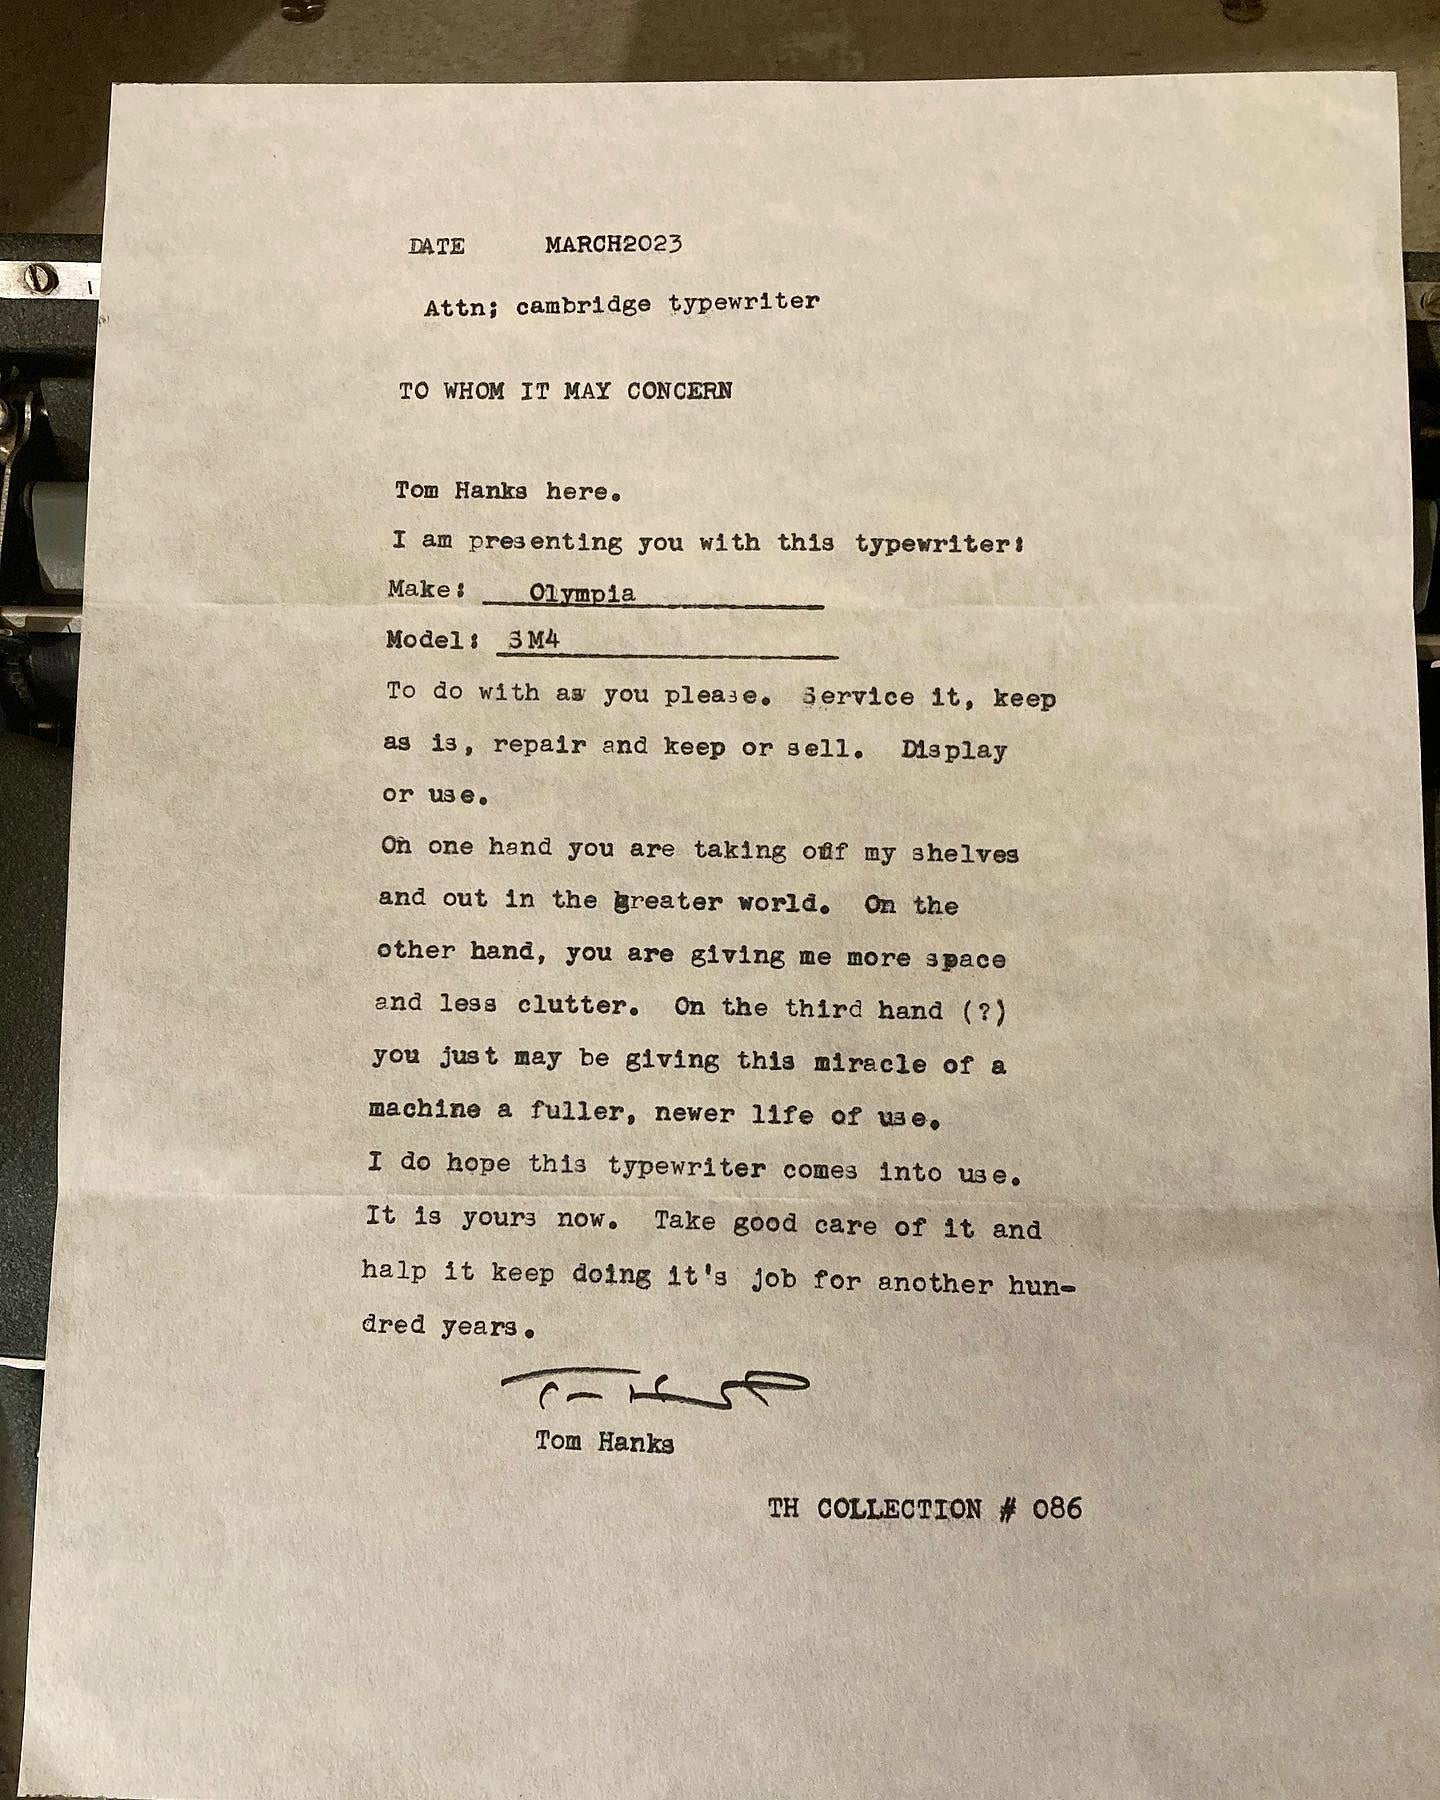 A typewriter-written letter from Tom Hanks, explaining his decision to gift Cambridge Typewriter with a vintage model from his collection.